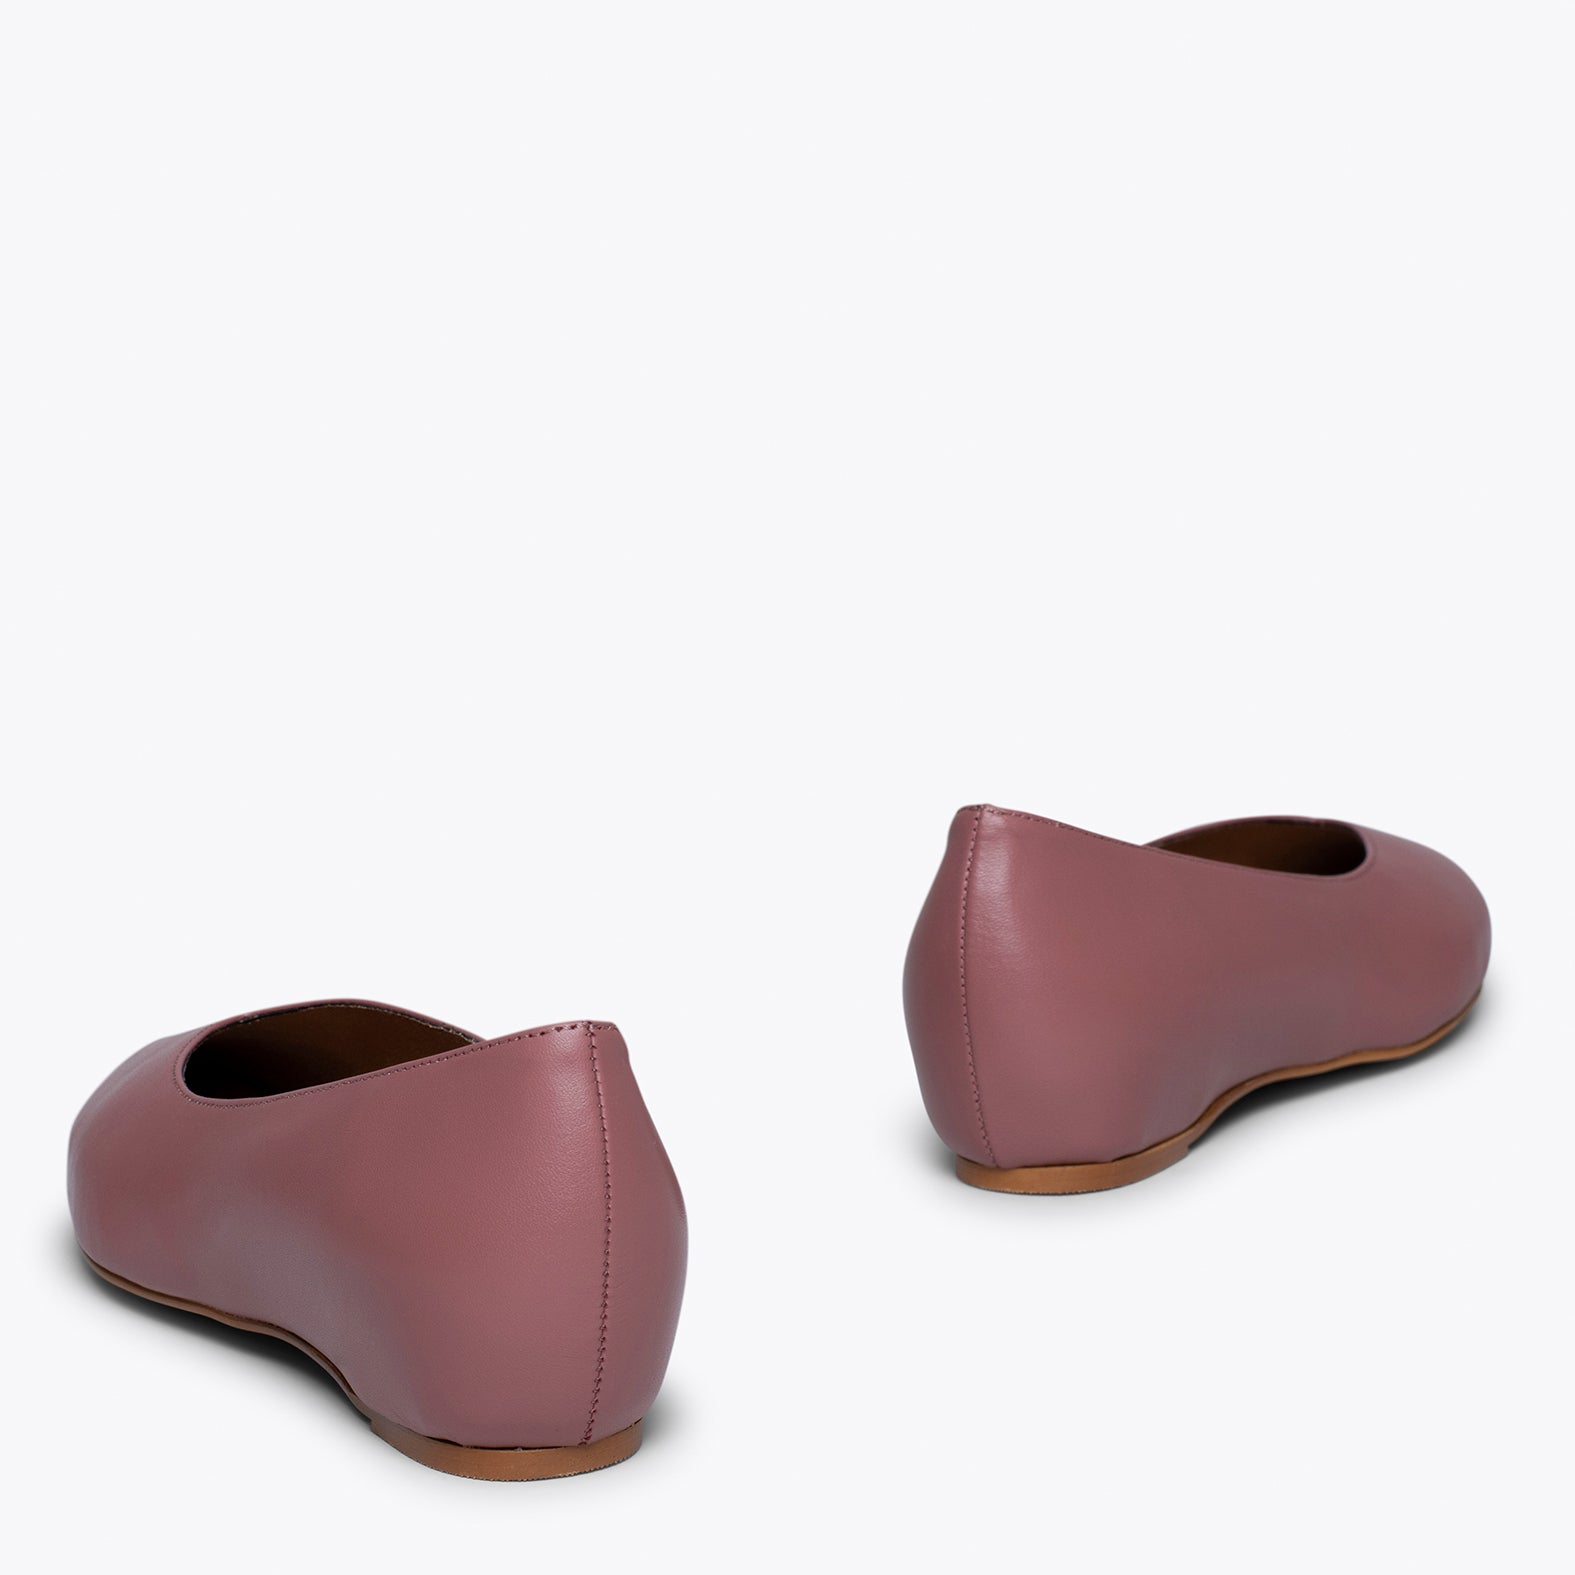 URBAN WEDGE- ASH PINK flat shoes with hidden wedge